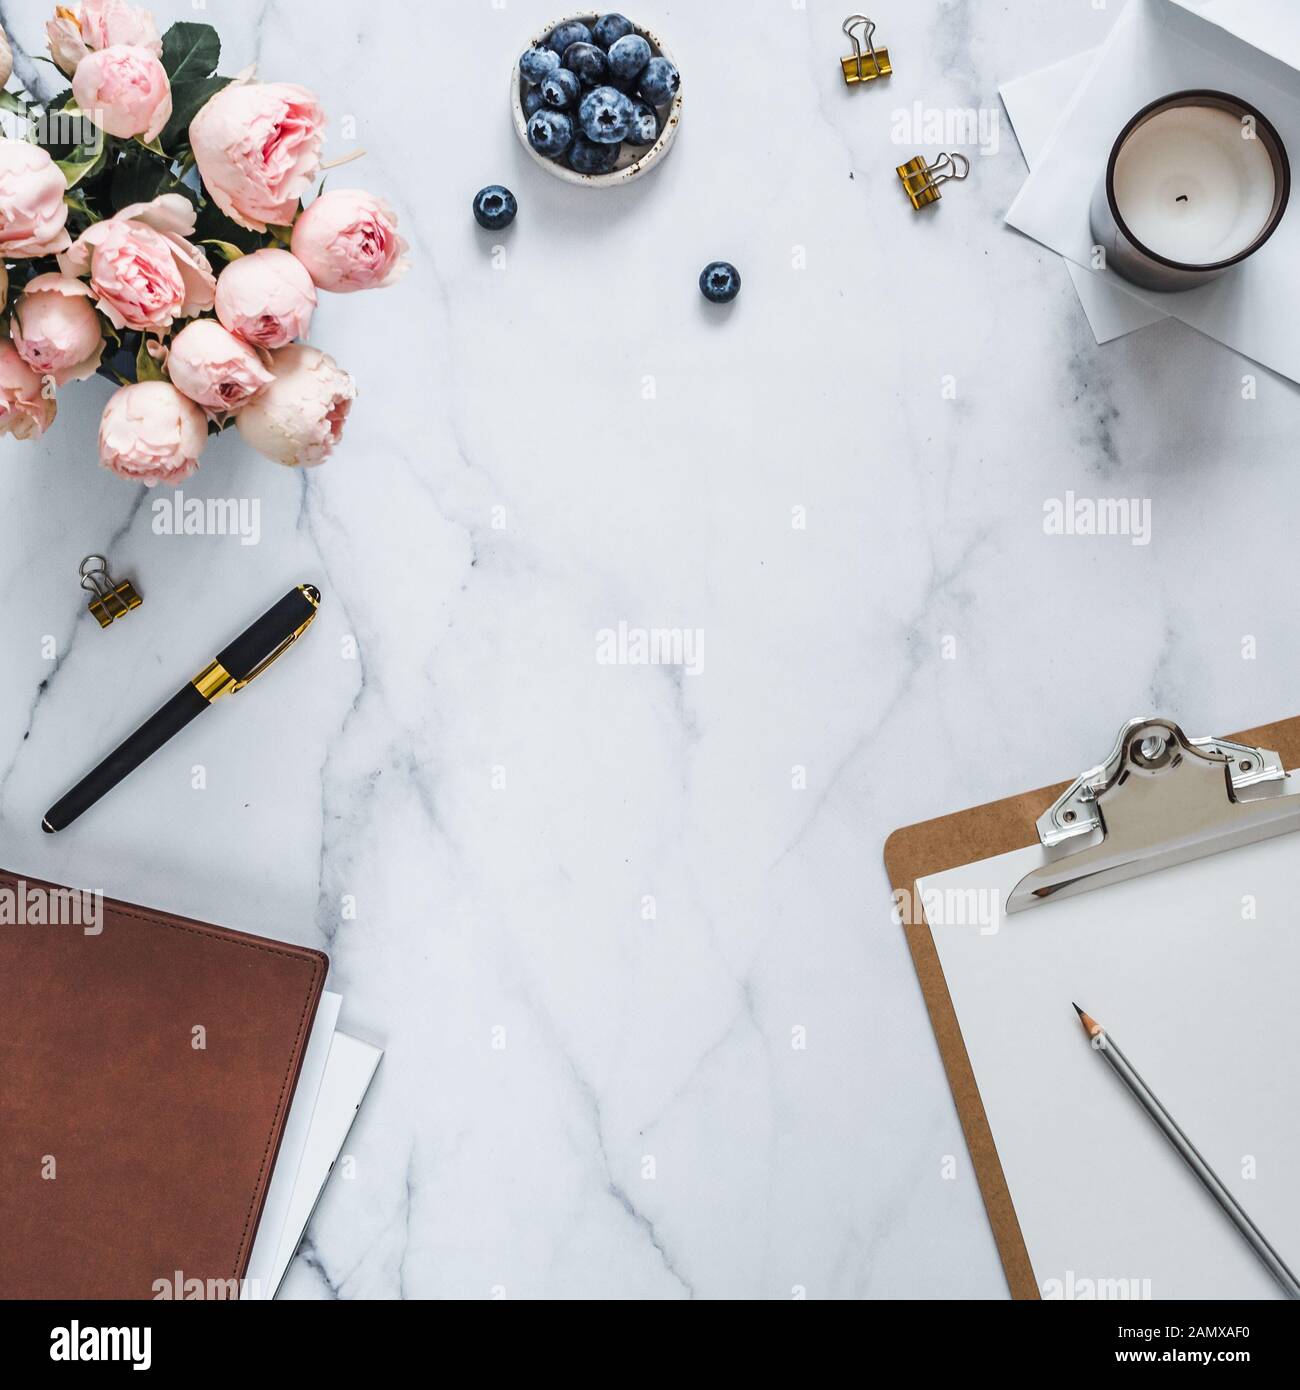 Top view of female home office with copy space in center. Clipboard, flowers, scented candle on white marble. Feminine home office mock up with copy space for text or design. Flat lay Stock Photo